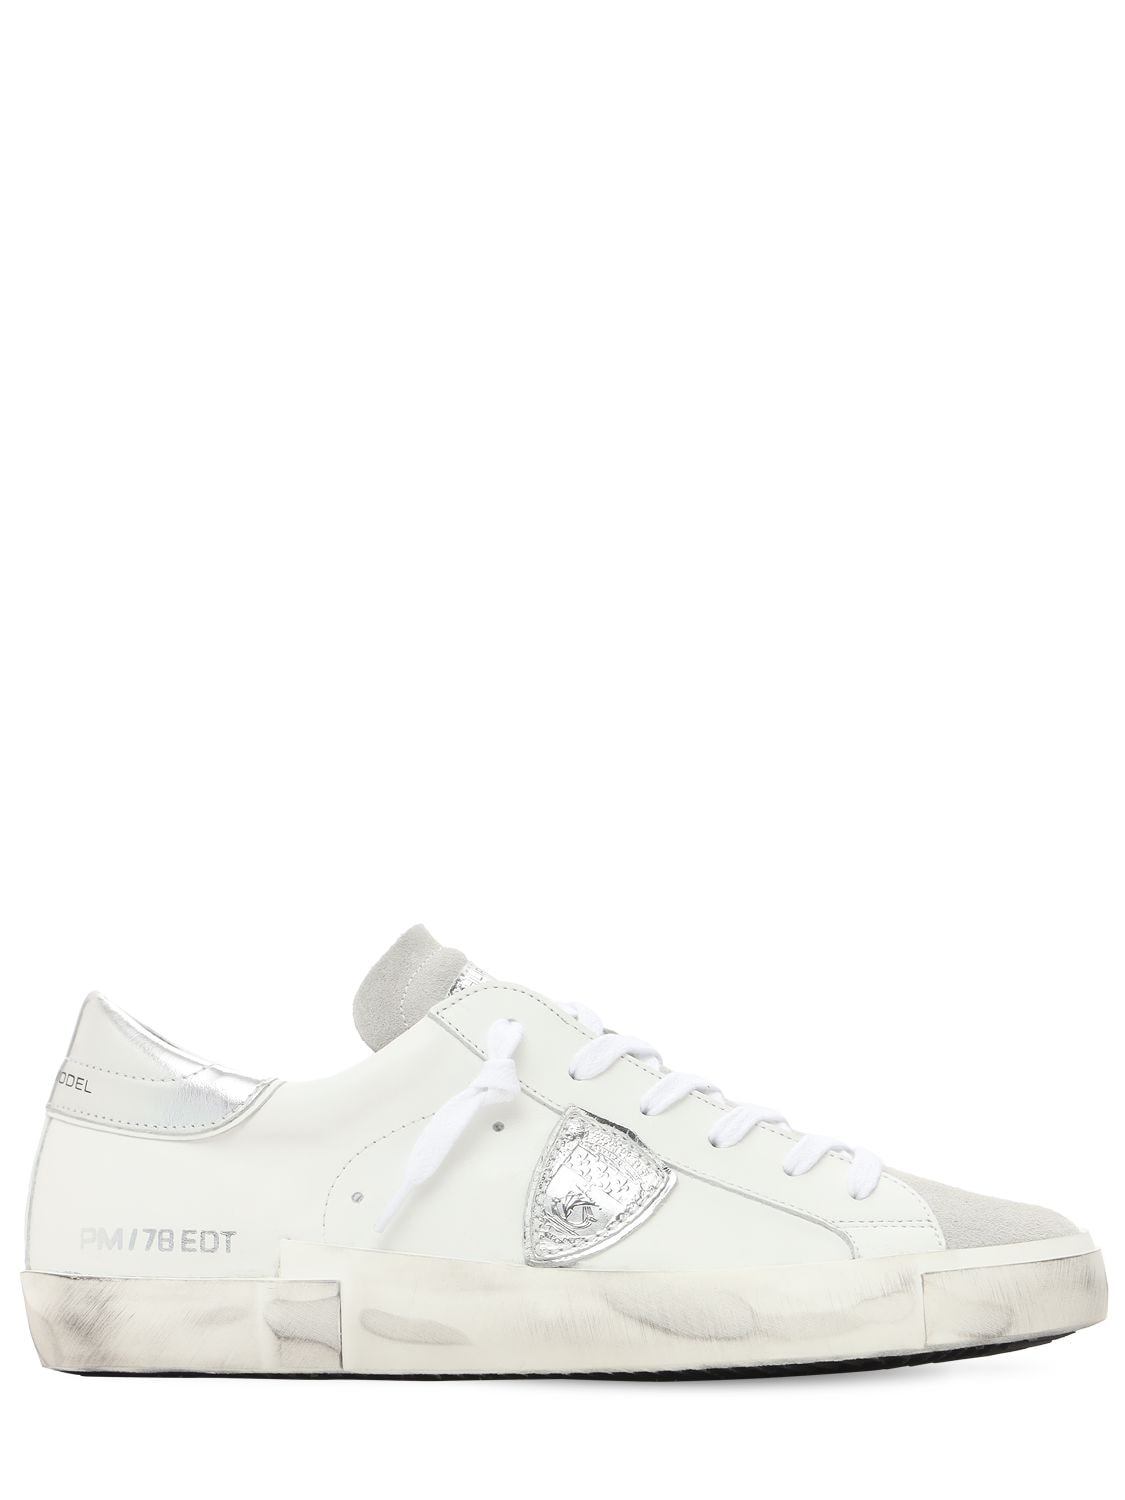 Philippe Model Paris Leather & Suede Sneakers In White | ModeSens